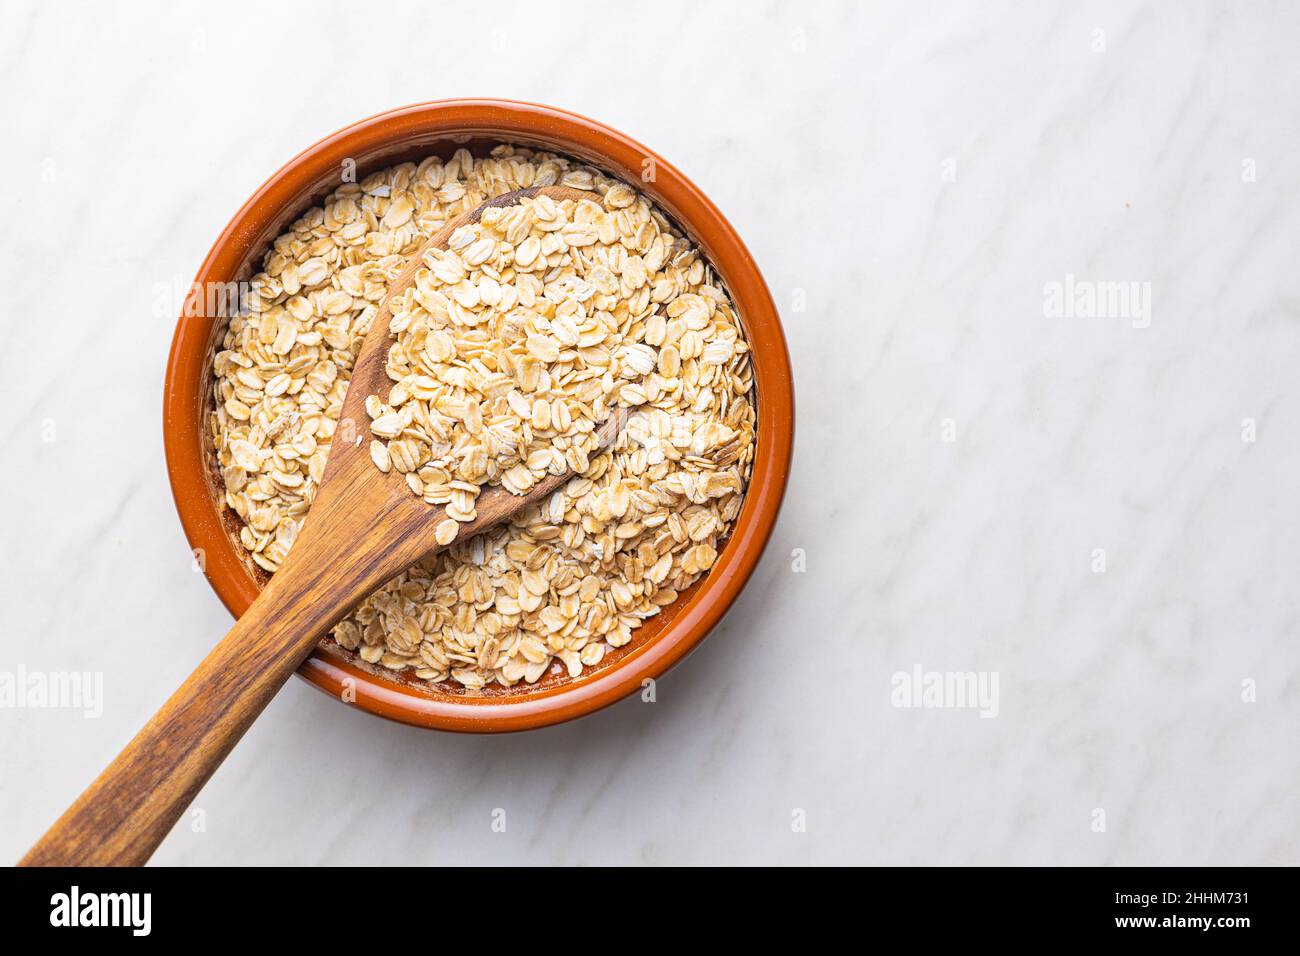 Breakfast cereals. Uncooked oatmeal. Raw oat flakes in bowl. Top view. Stock Photo